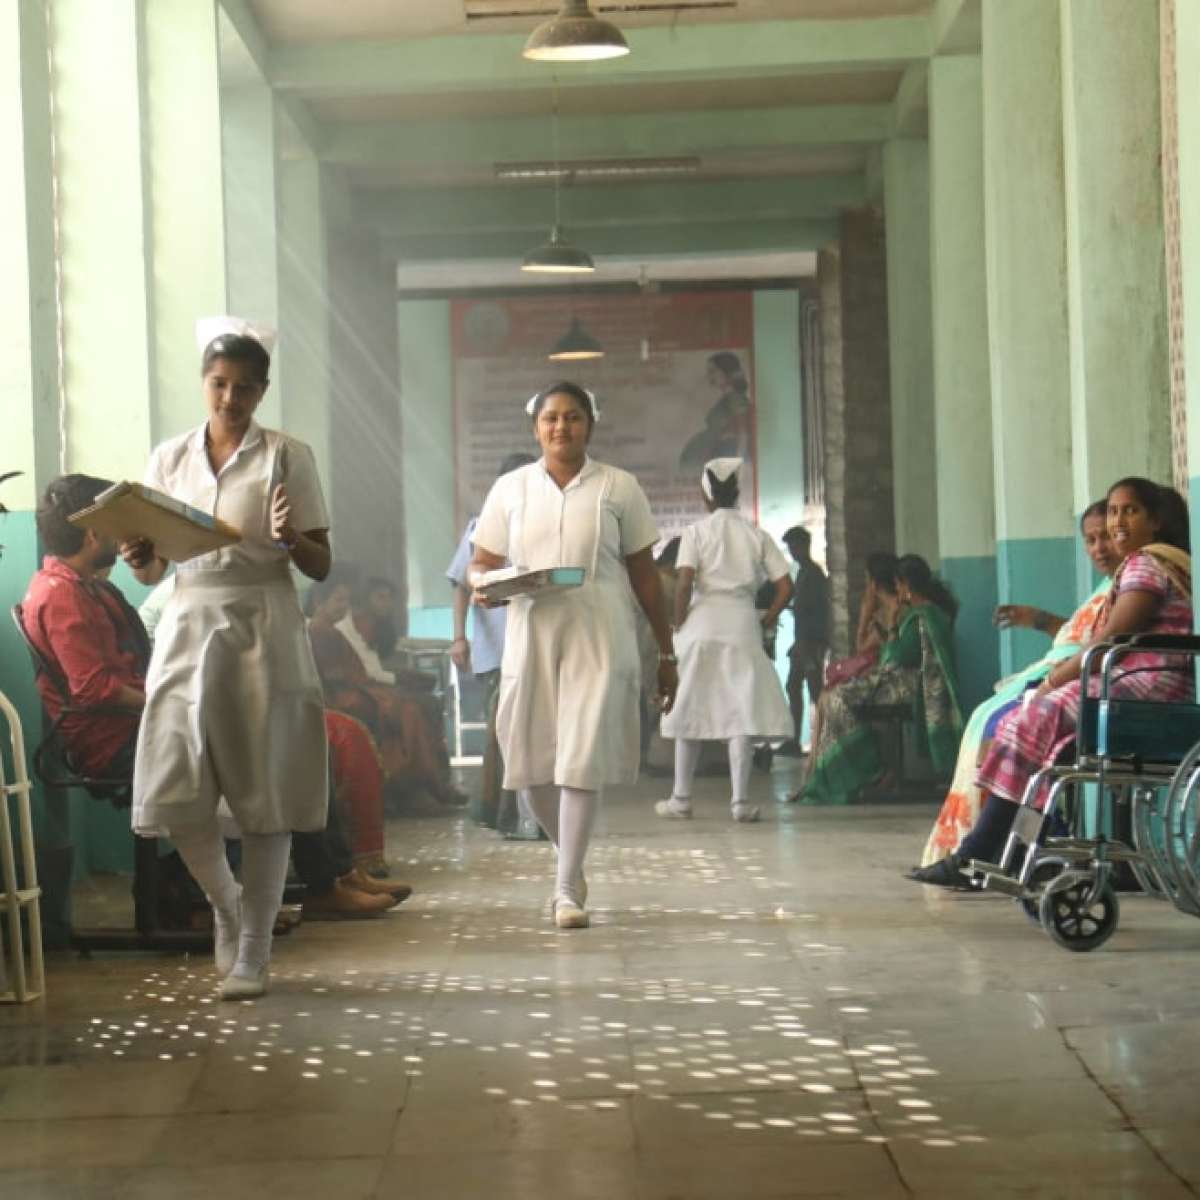 View of a hospital hall in Hyderabad, India